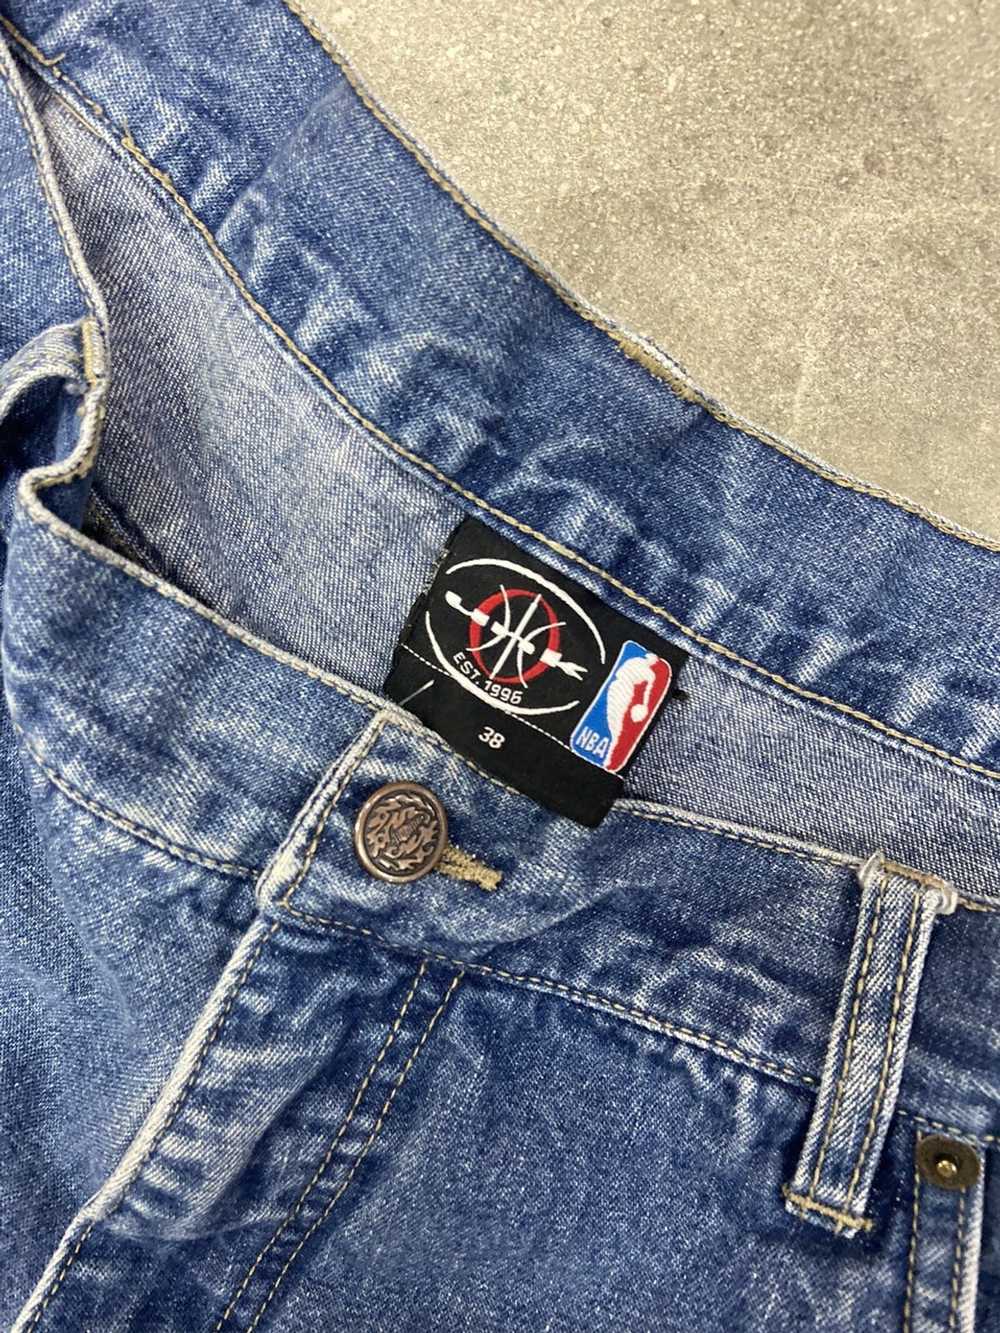 Unk, Jeans, Unk Jeans Nba Teams Embroidered